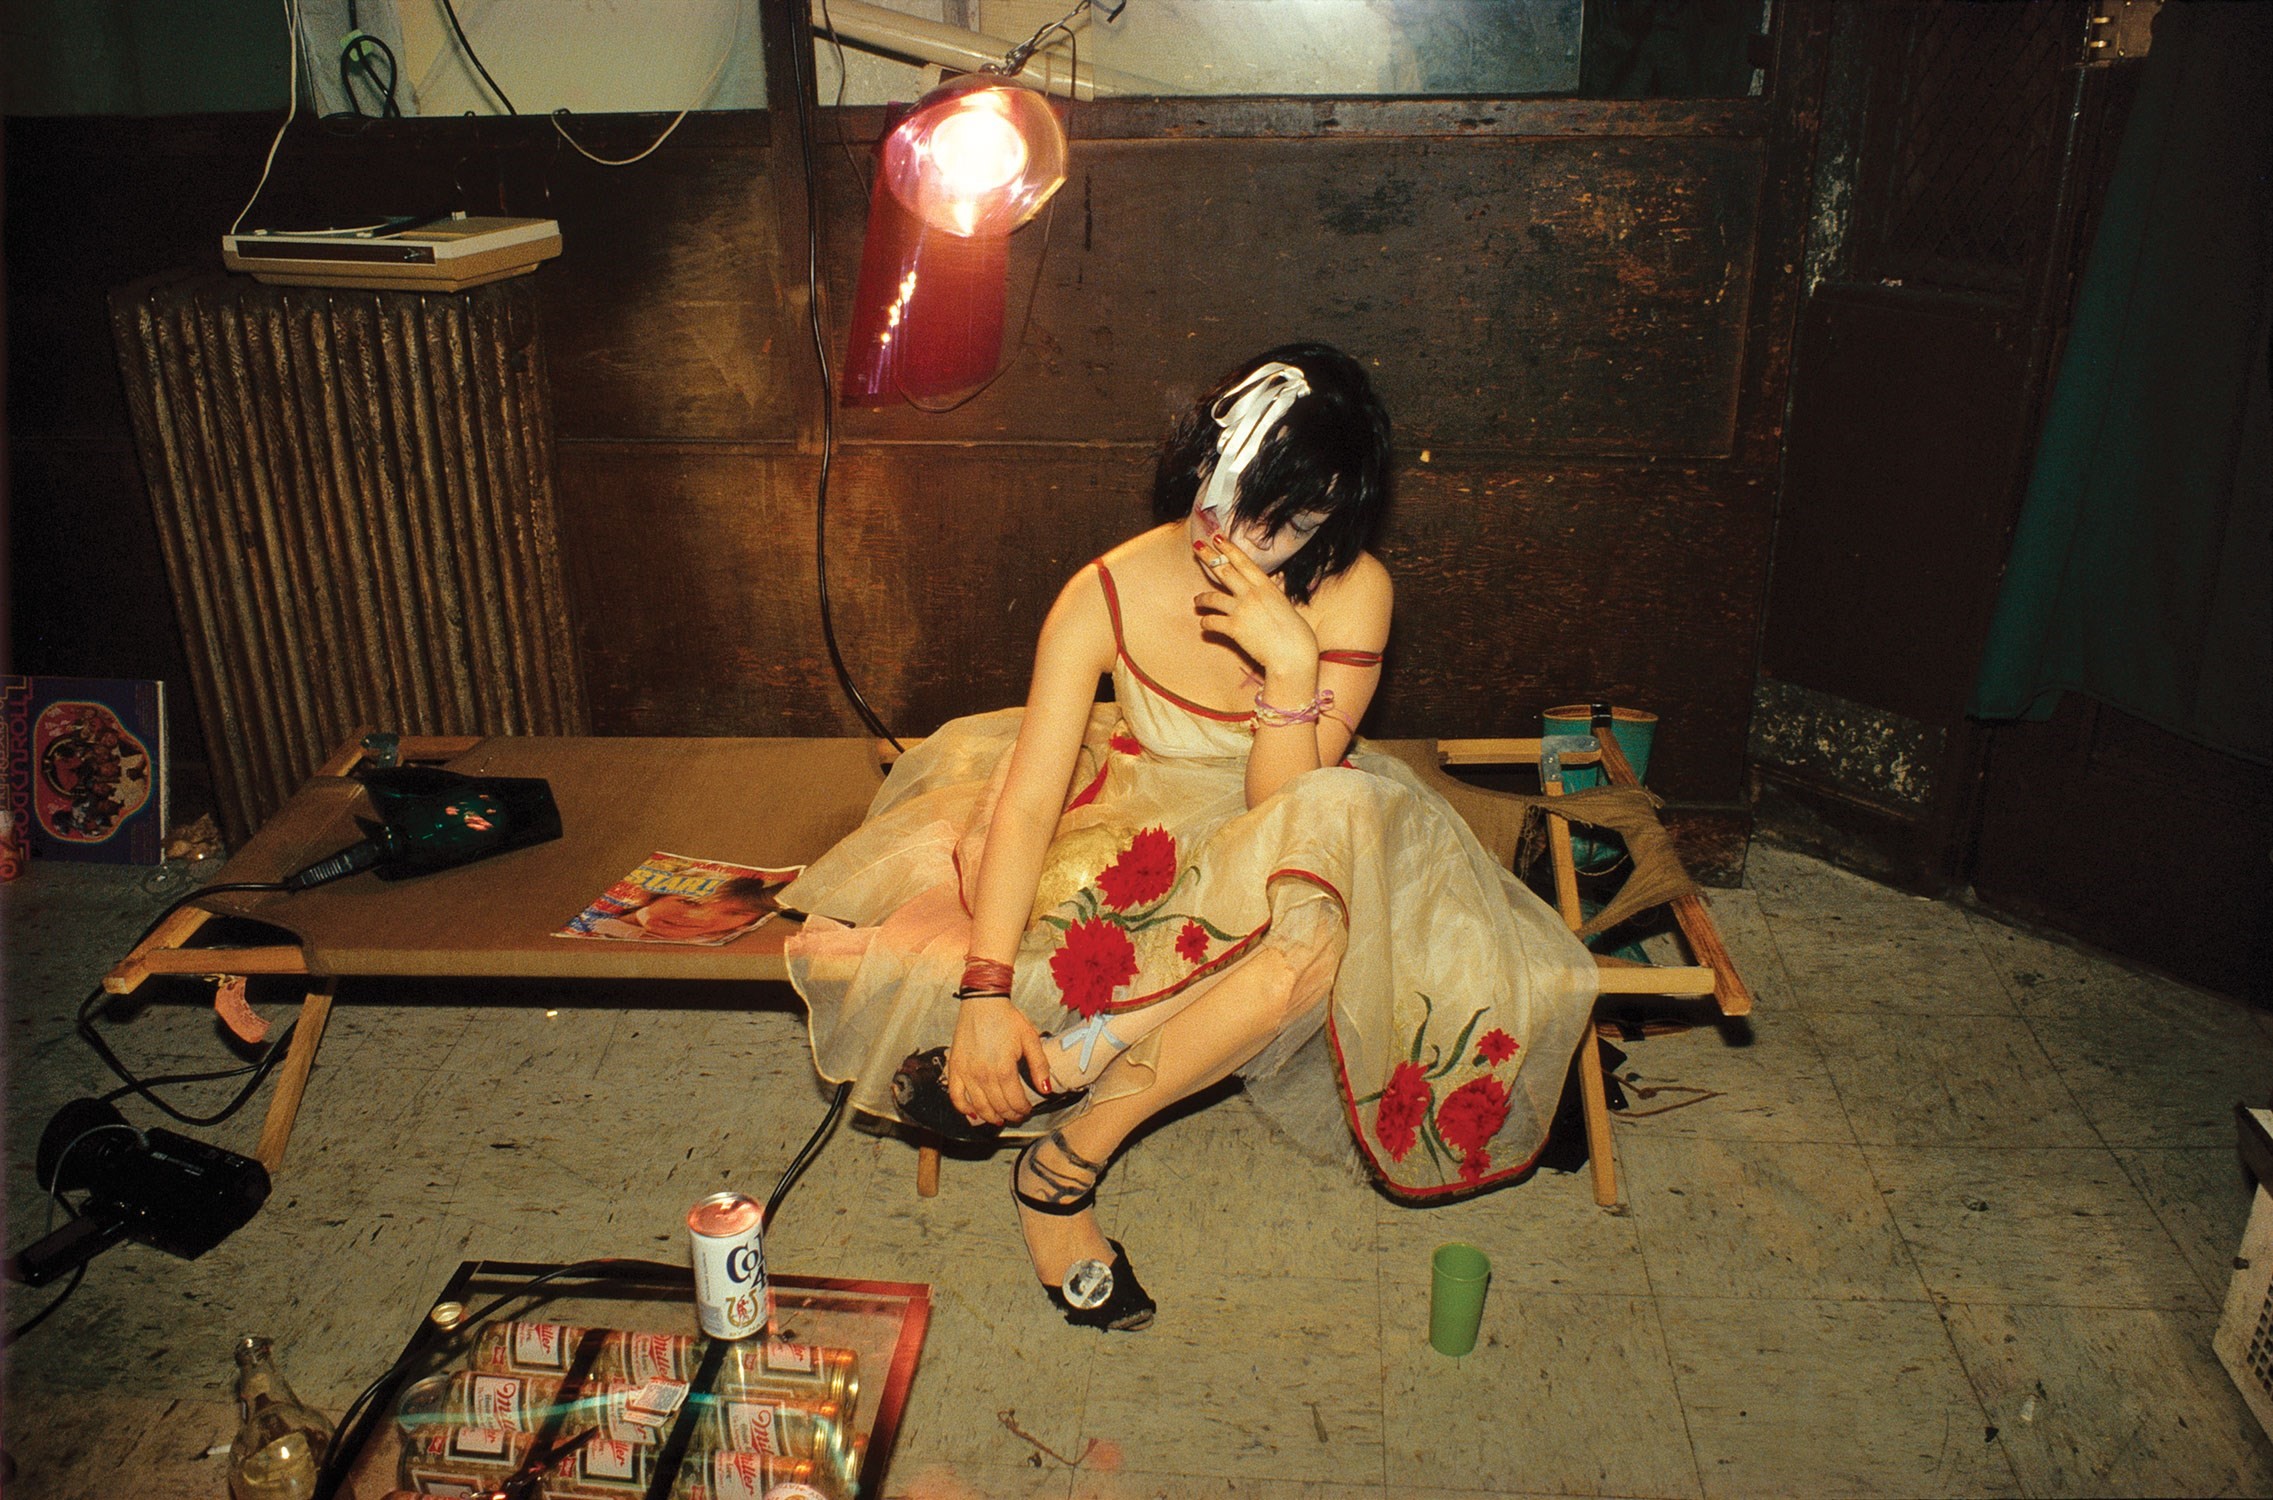 A Candid Interview from 1986 with Seminal Photographer Nan Goldin AnOther photo